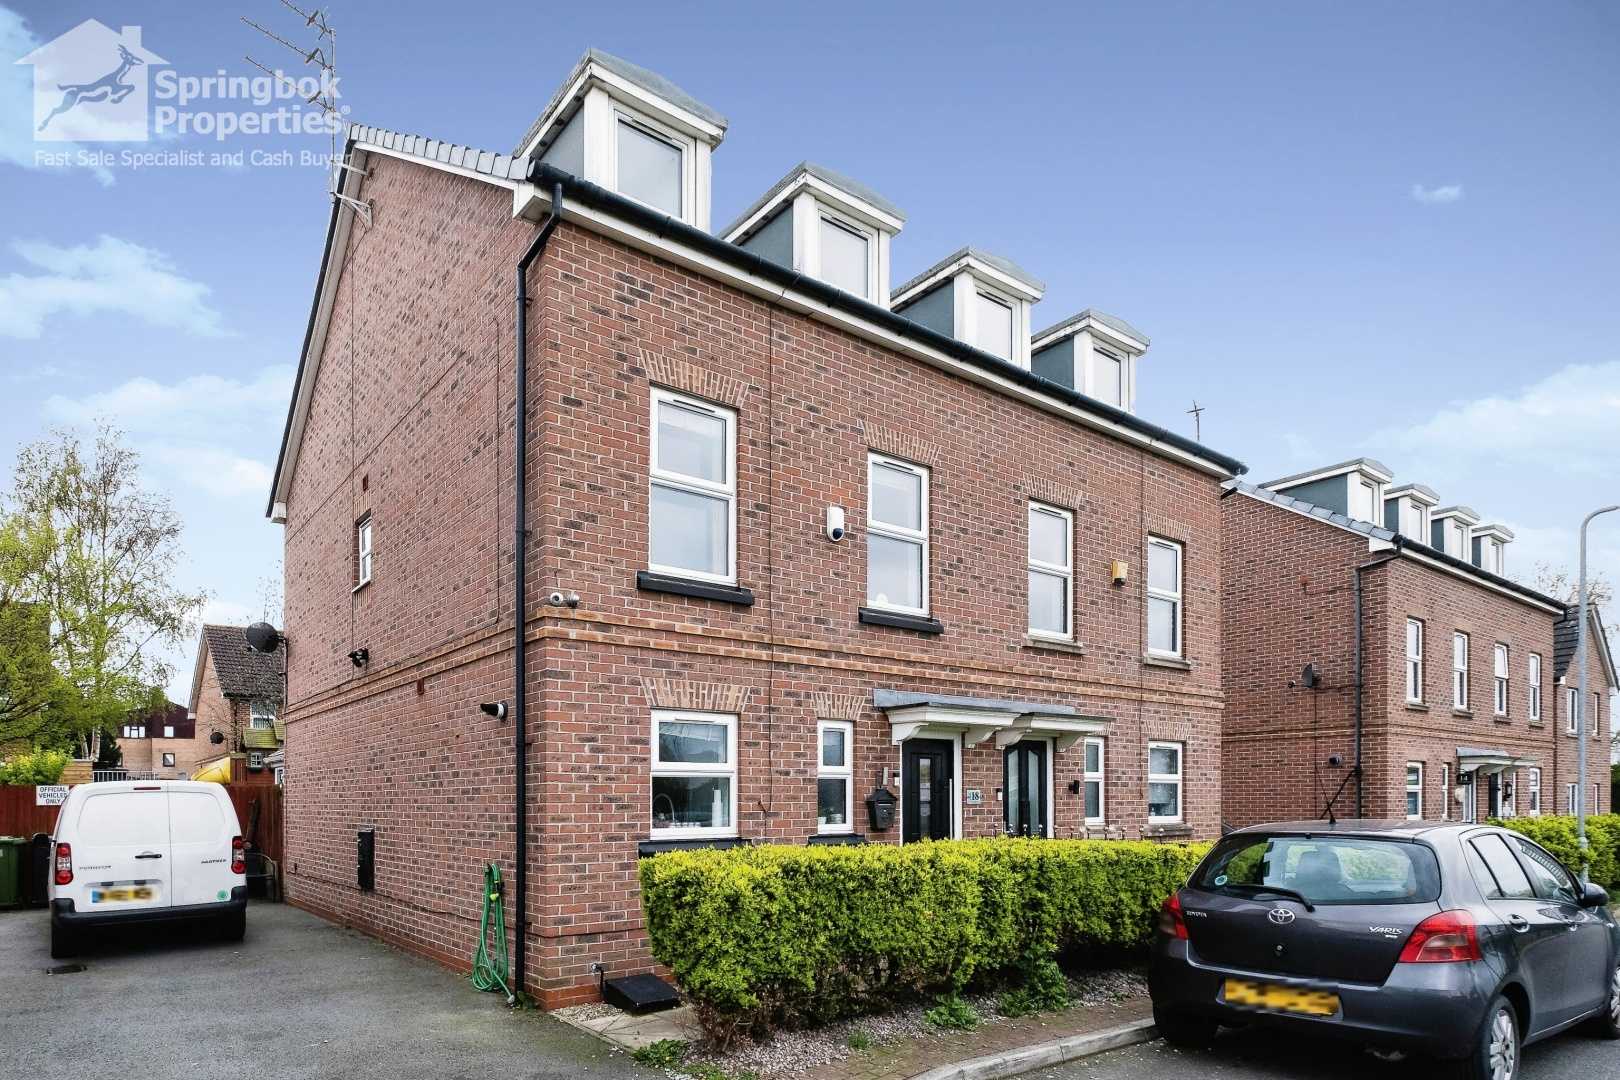 House in Bootle, Sefton 11721654